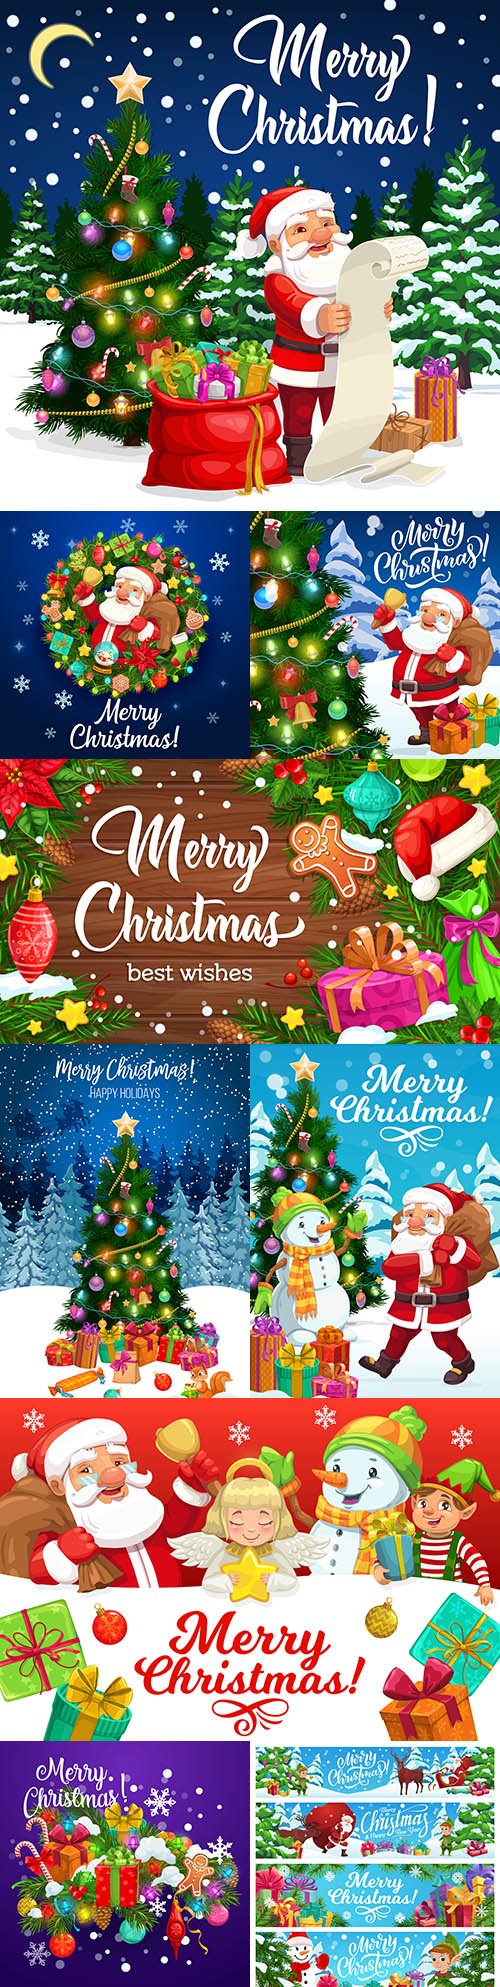 Christmas greeting card with Santa Claus gifts